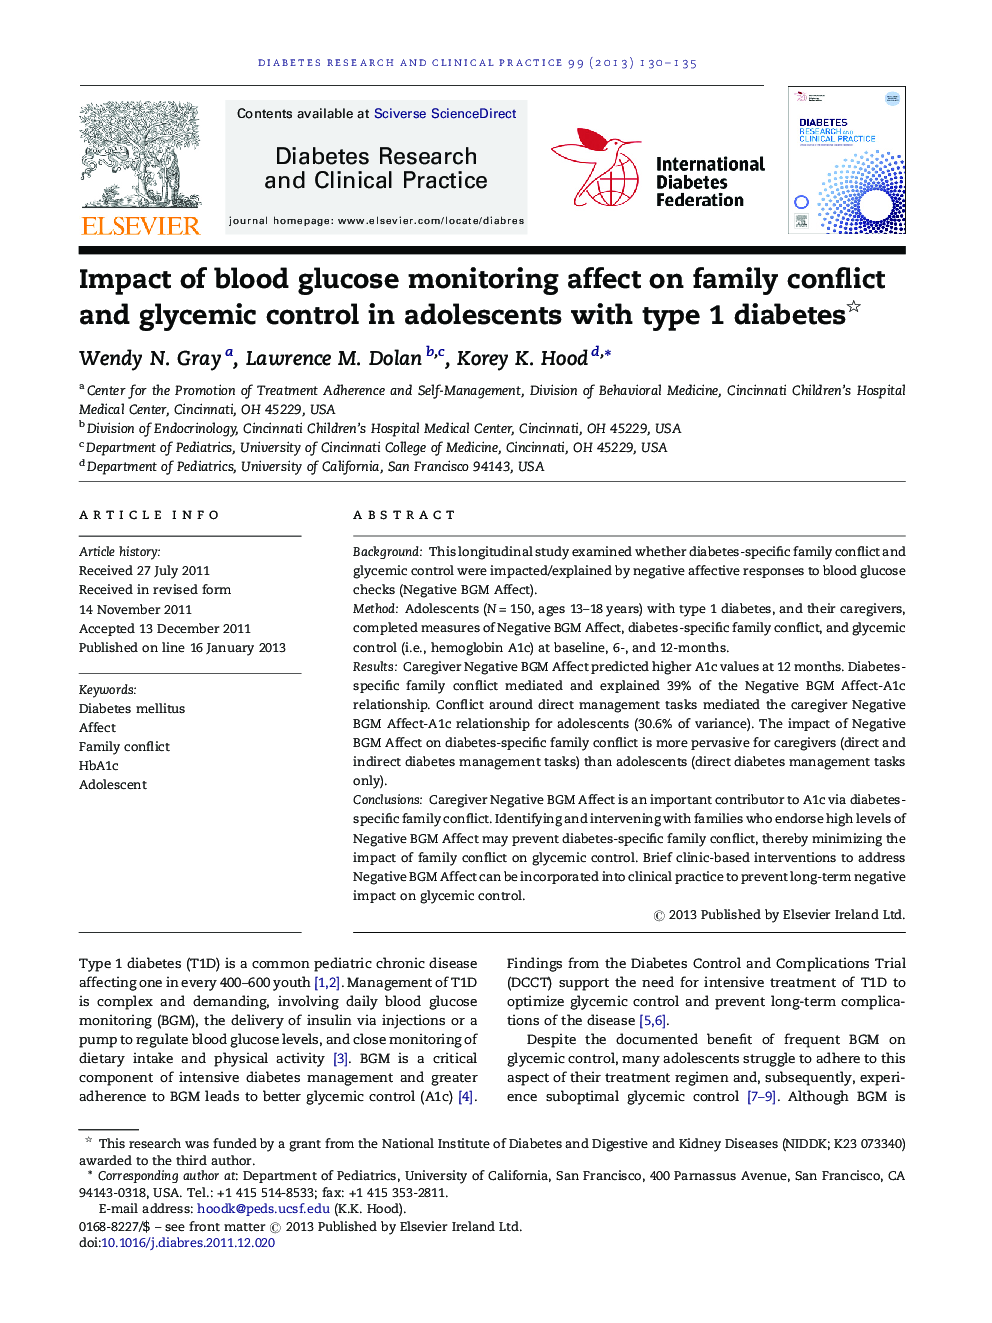 Impact of blood glucose monitoring affect on family conflict and glycemic control in adolescents with type 1 diabetes